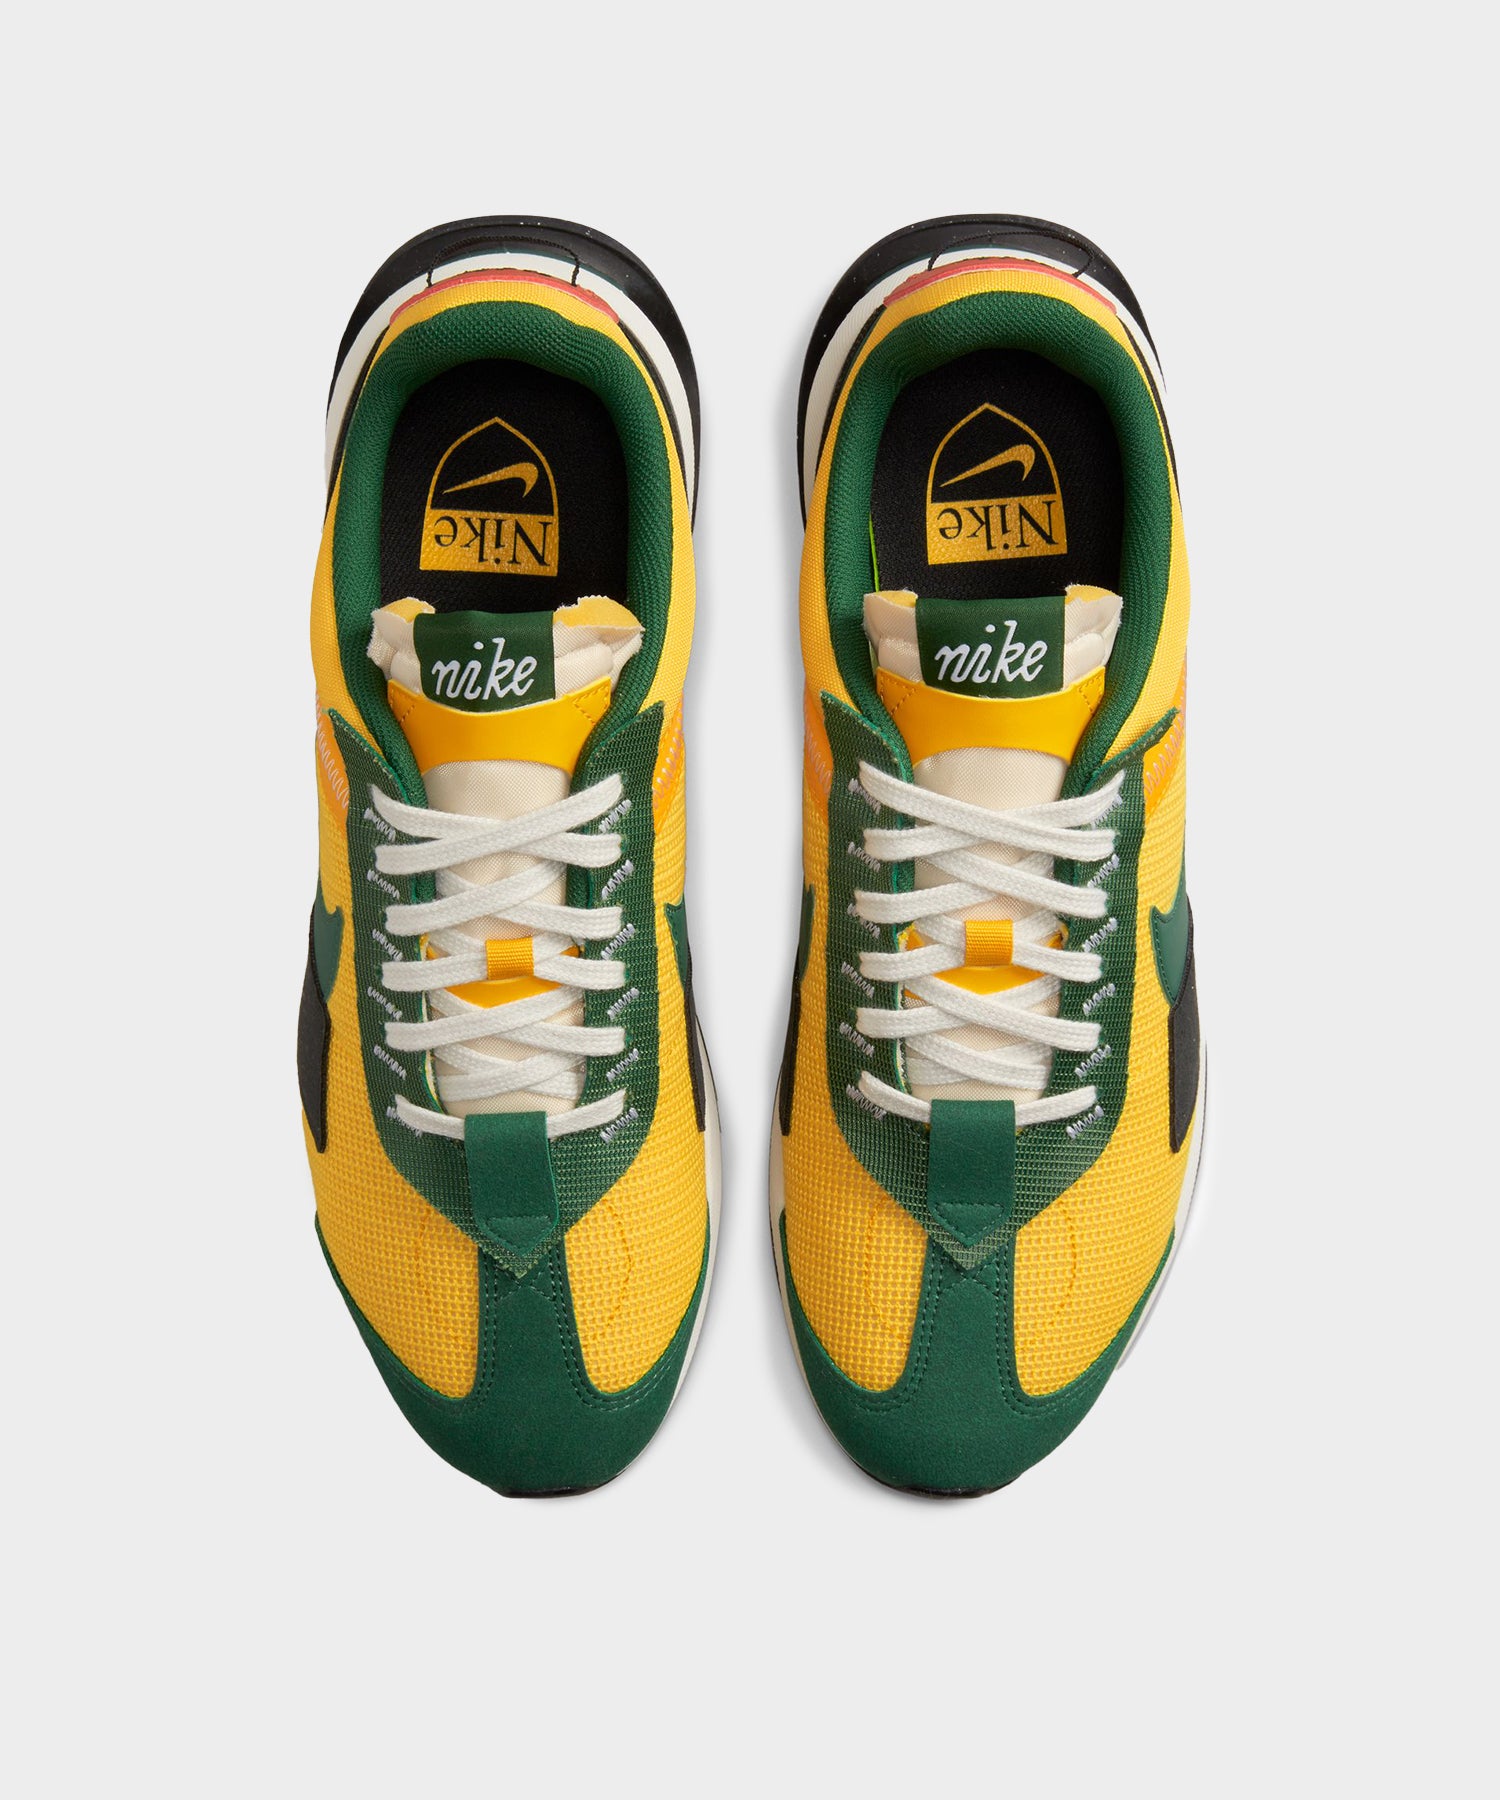 Nike Max Pre-day University Gold / Gorge Green - Todd Snyder